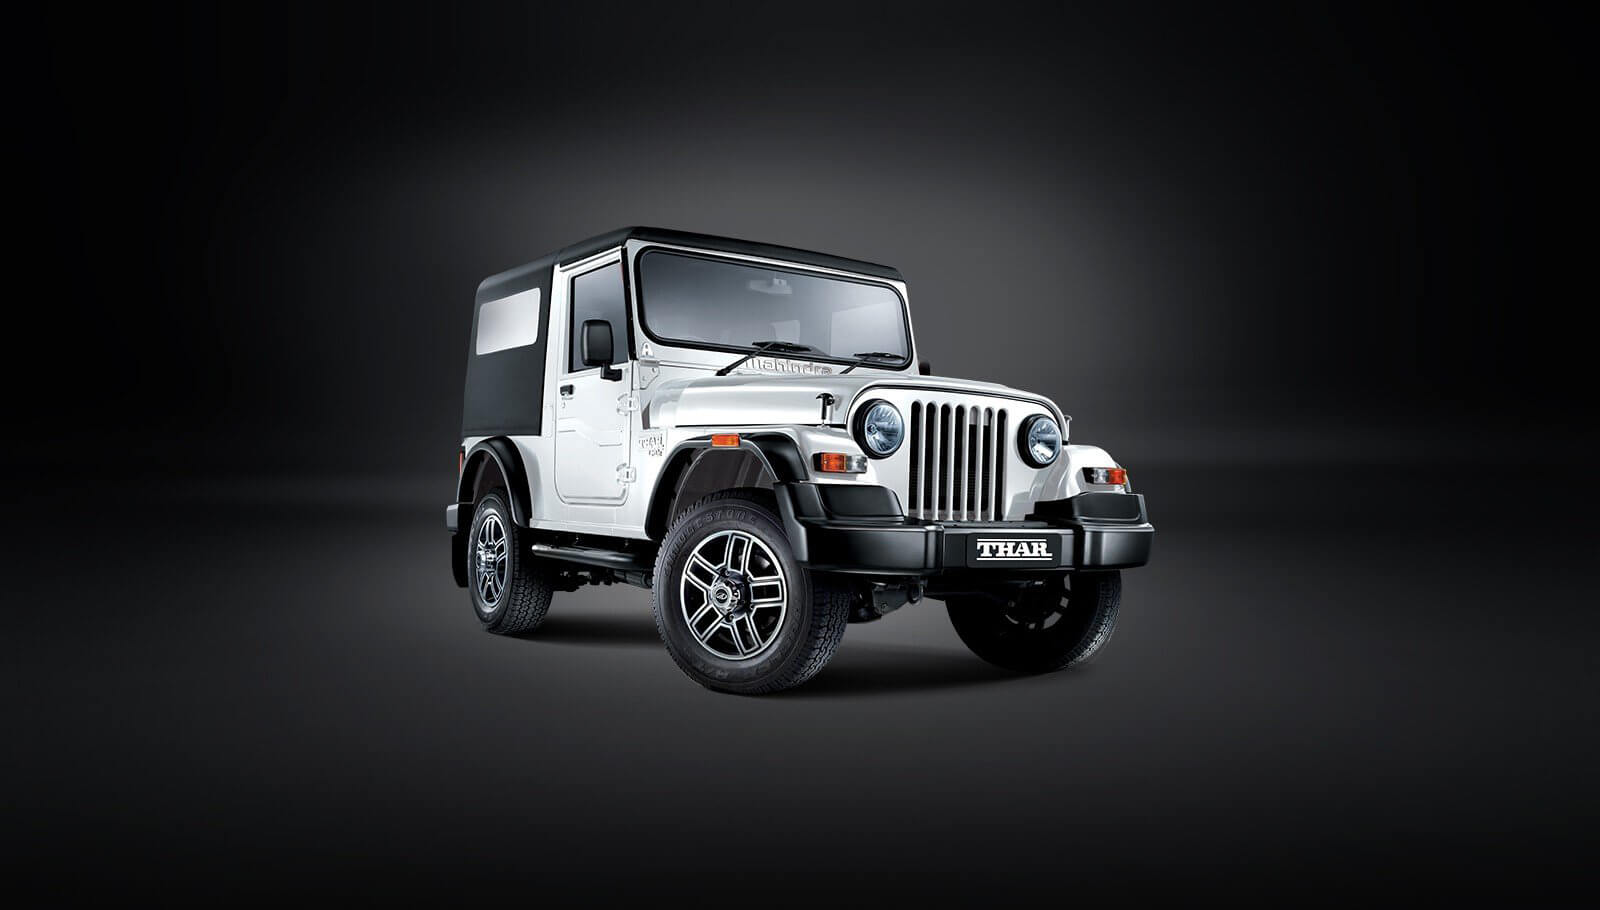 Mahindra Thar In India Reviews, Image, Specs, Mileage